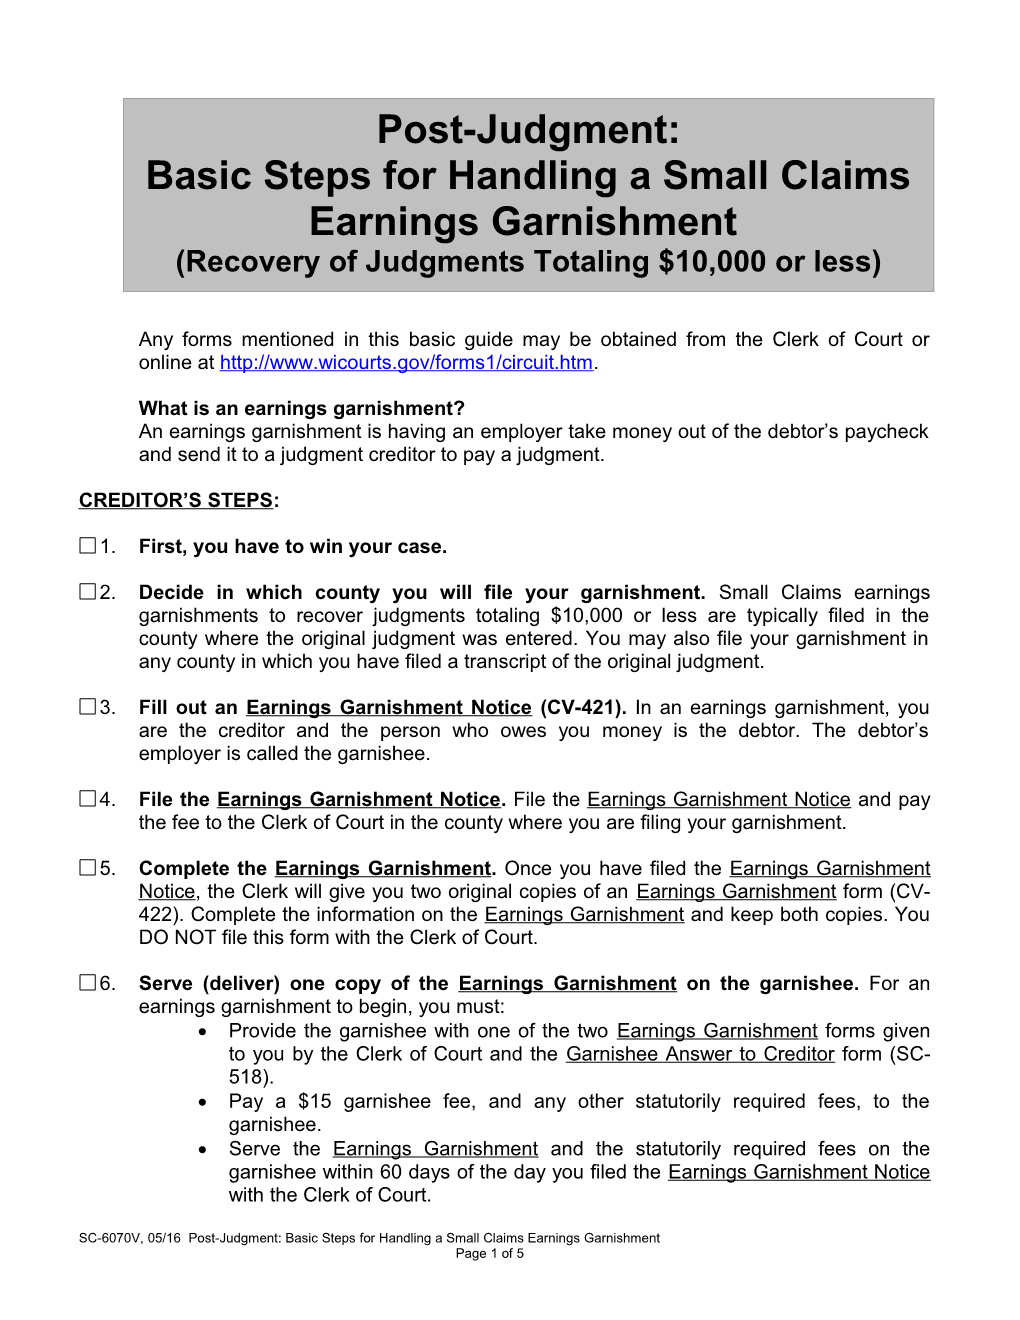 SC-6070: Post-Judgment: Basic Steps for Handling a Small Claims Earnings Garnishment